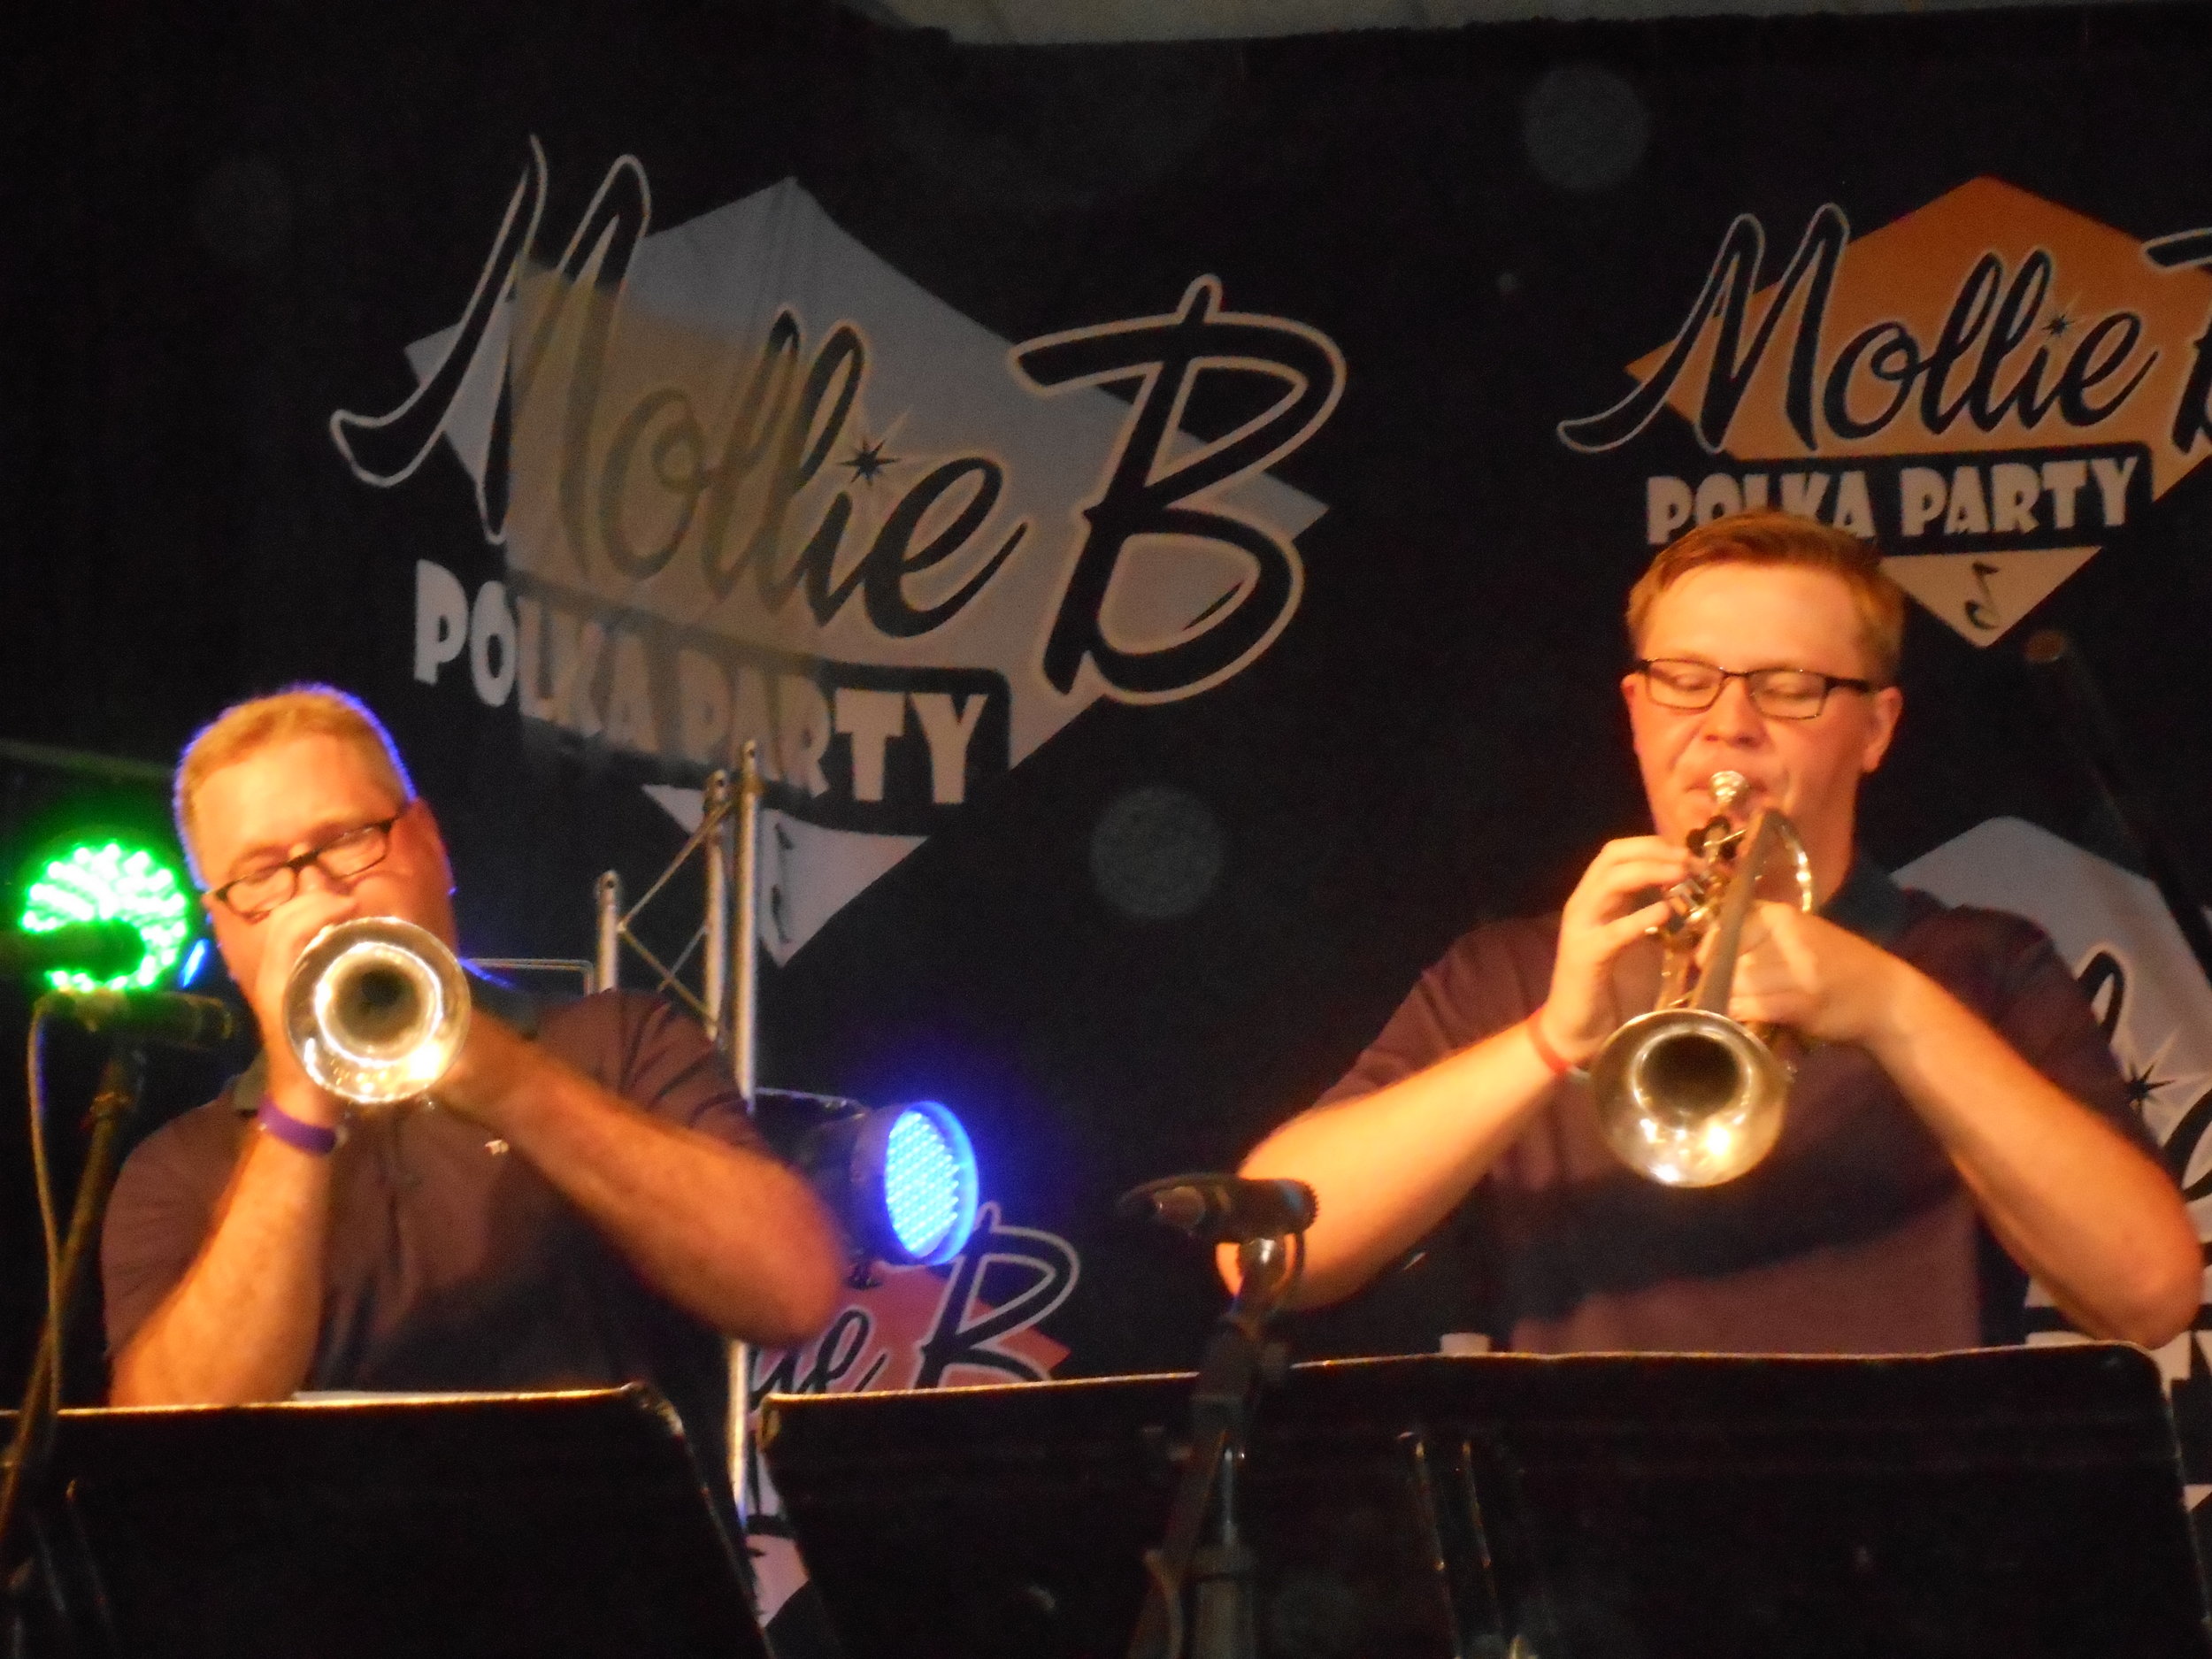 DZ with his son, Josh in CATS, at Mollie B Polka Party taping, 2016